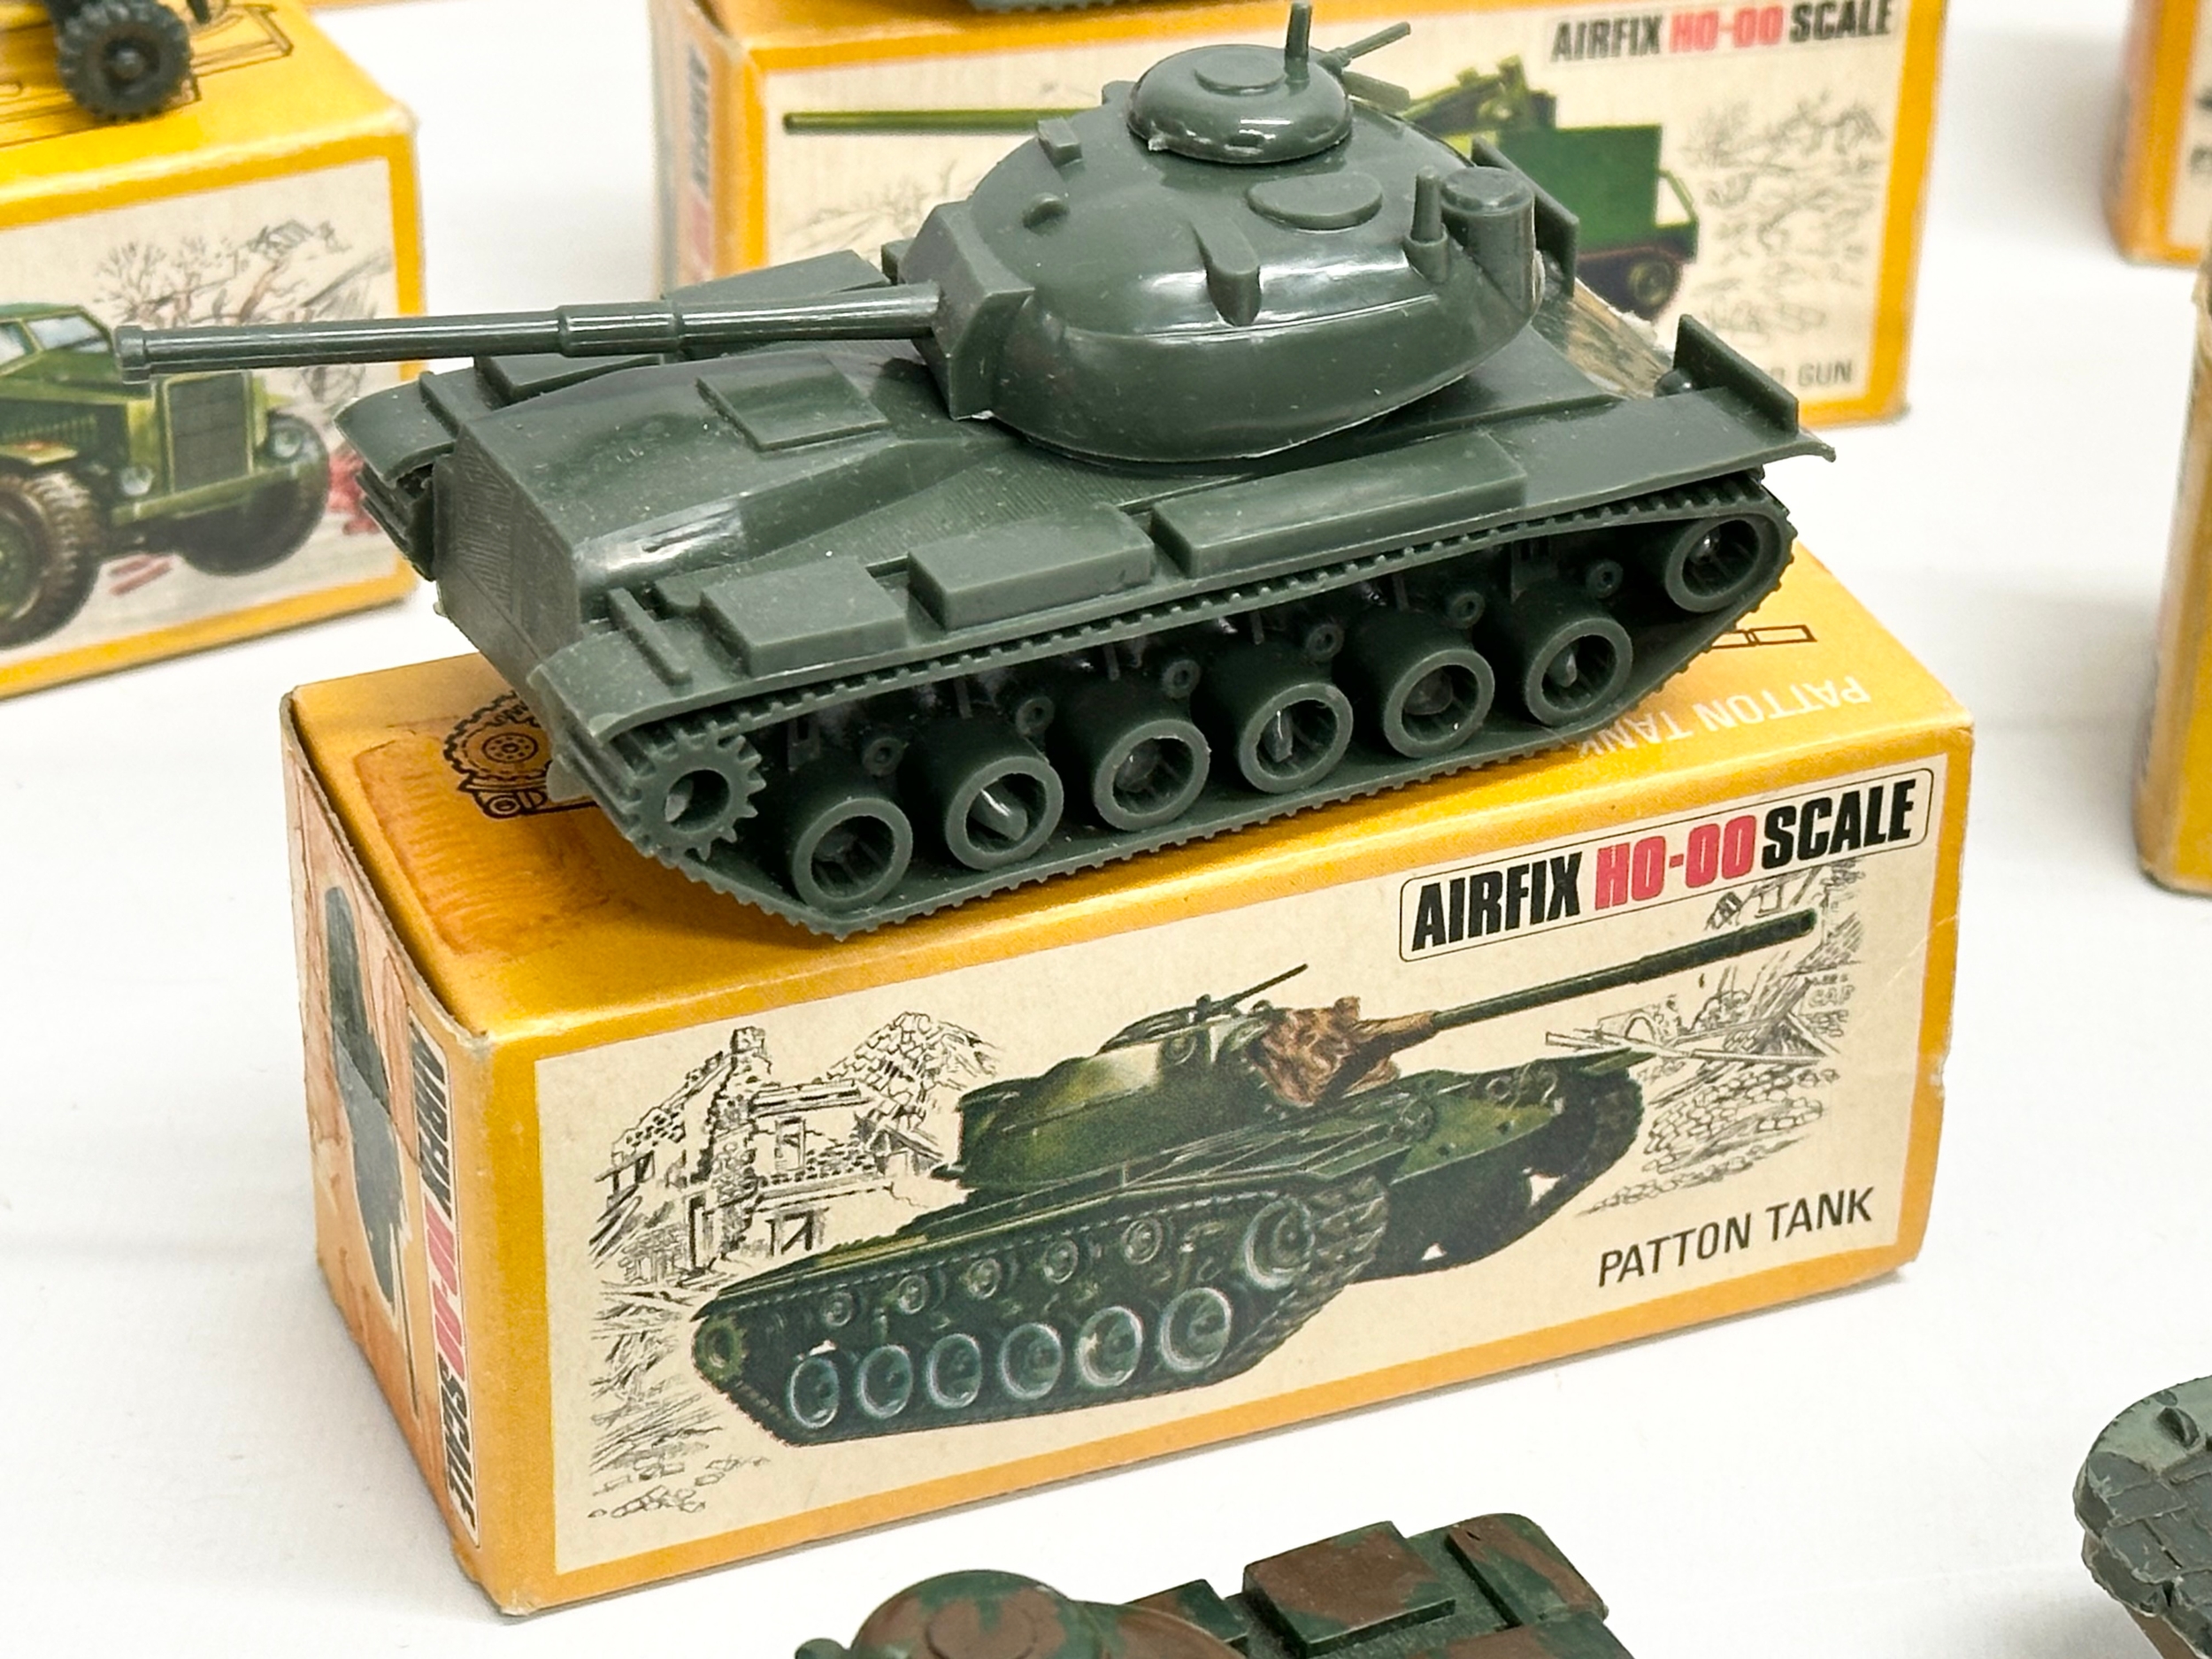 A collection of vintage Airfix HO-OO scale vehicles with boxes and soldiers. - Image 12 of 12